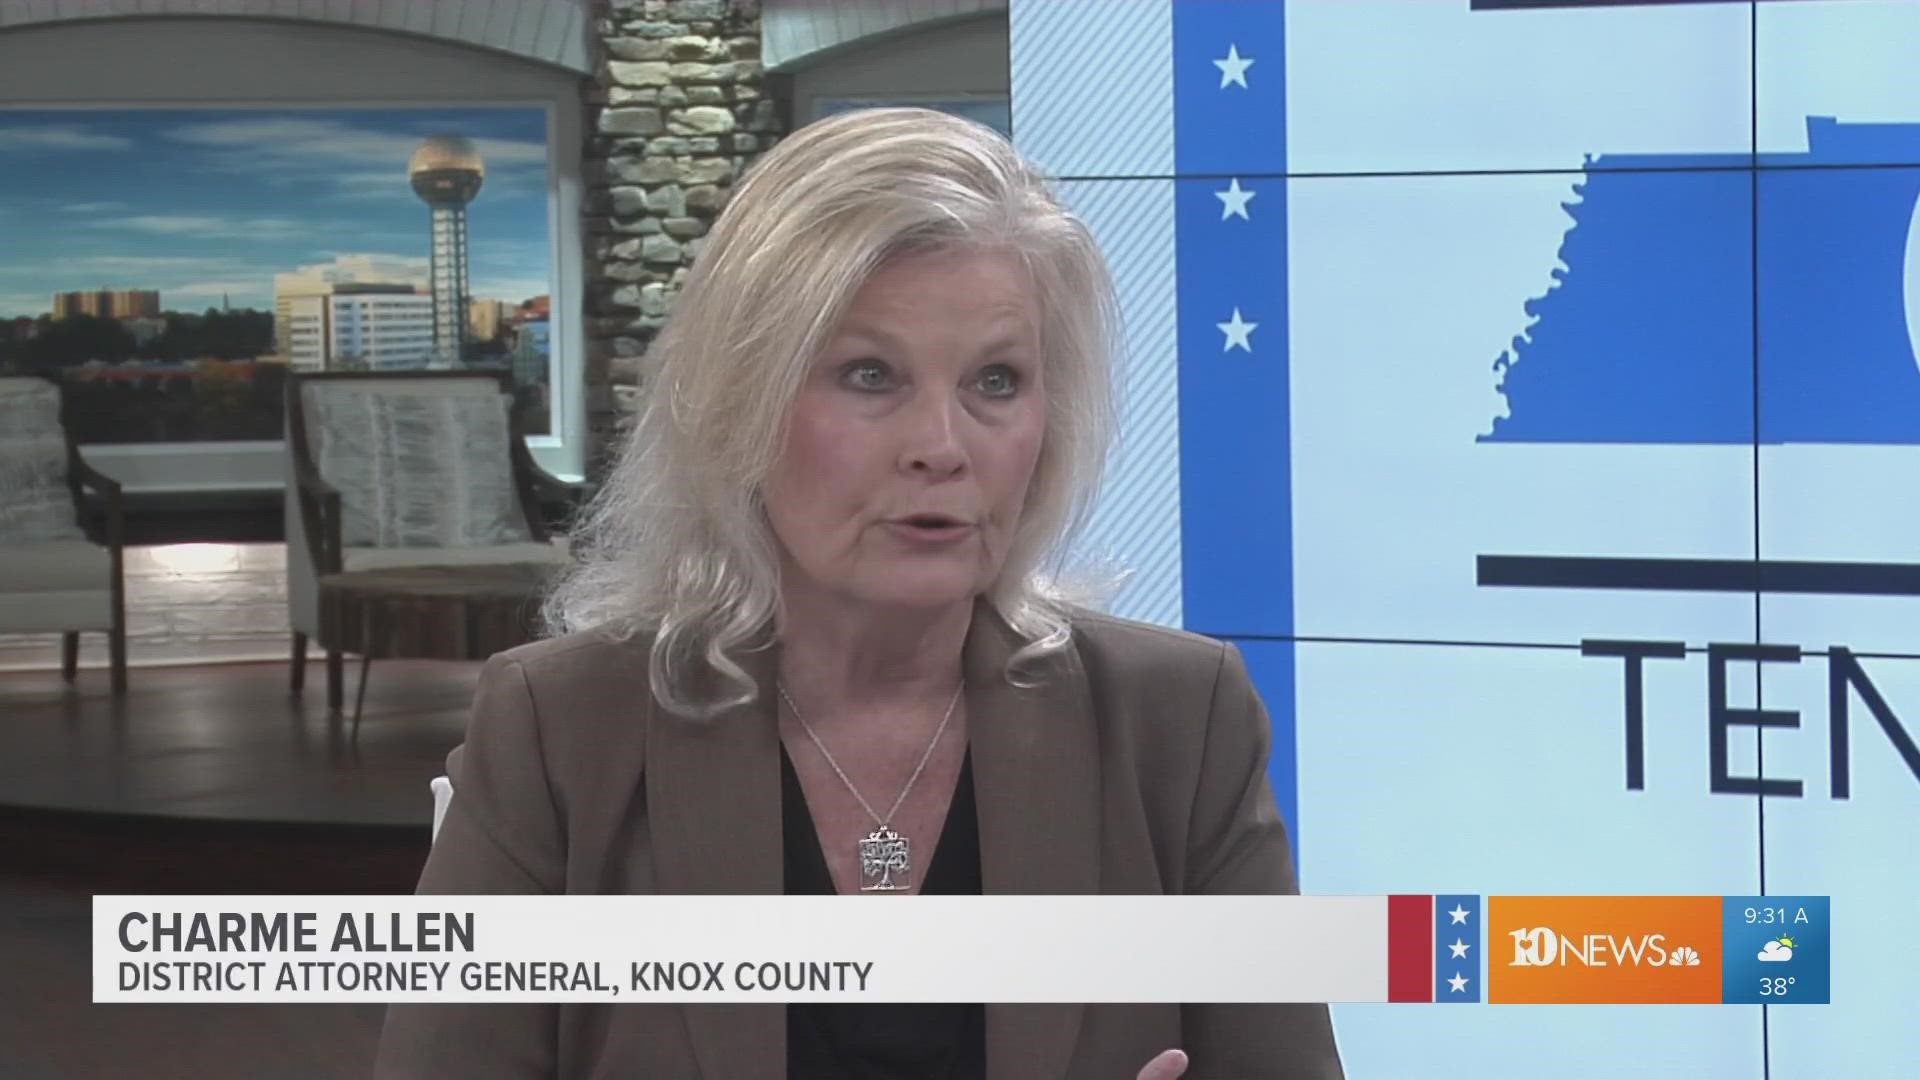 Knox County District Attorney General Charme Allen talks about legal matters.